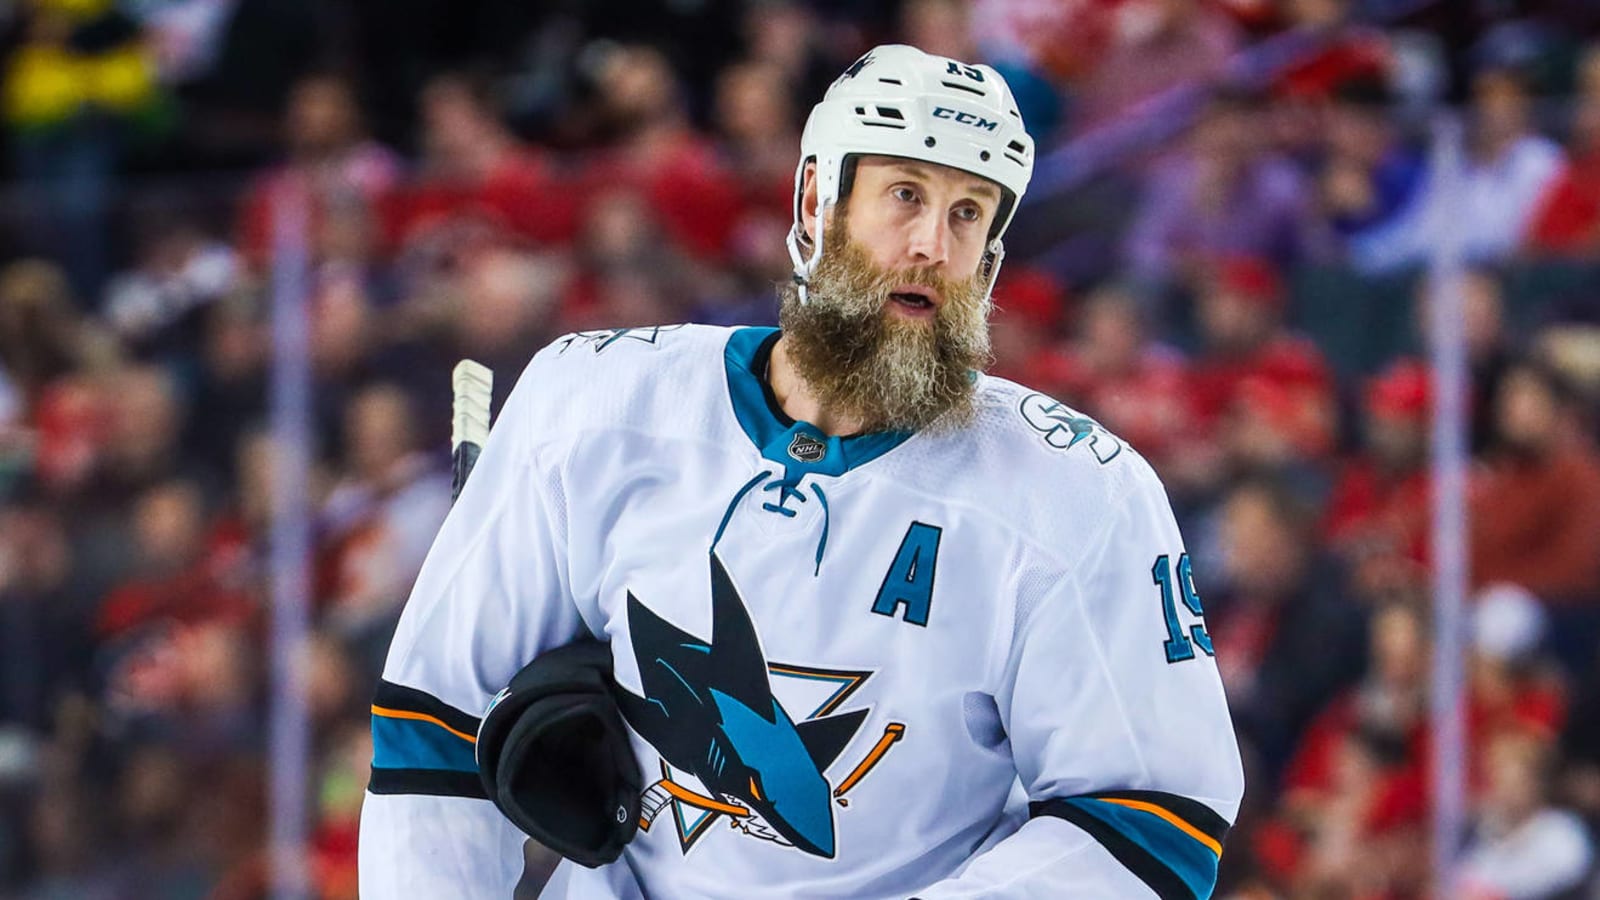 Joe Thornton signs one-year, $700K deal with Maple Leafs